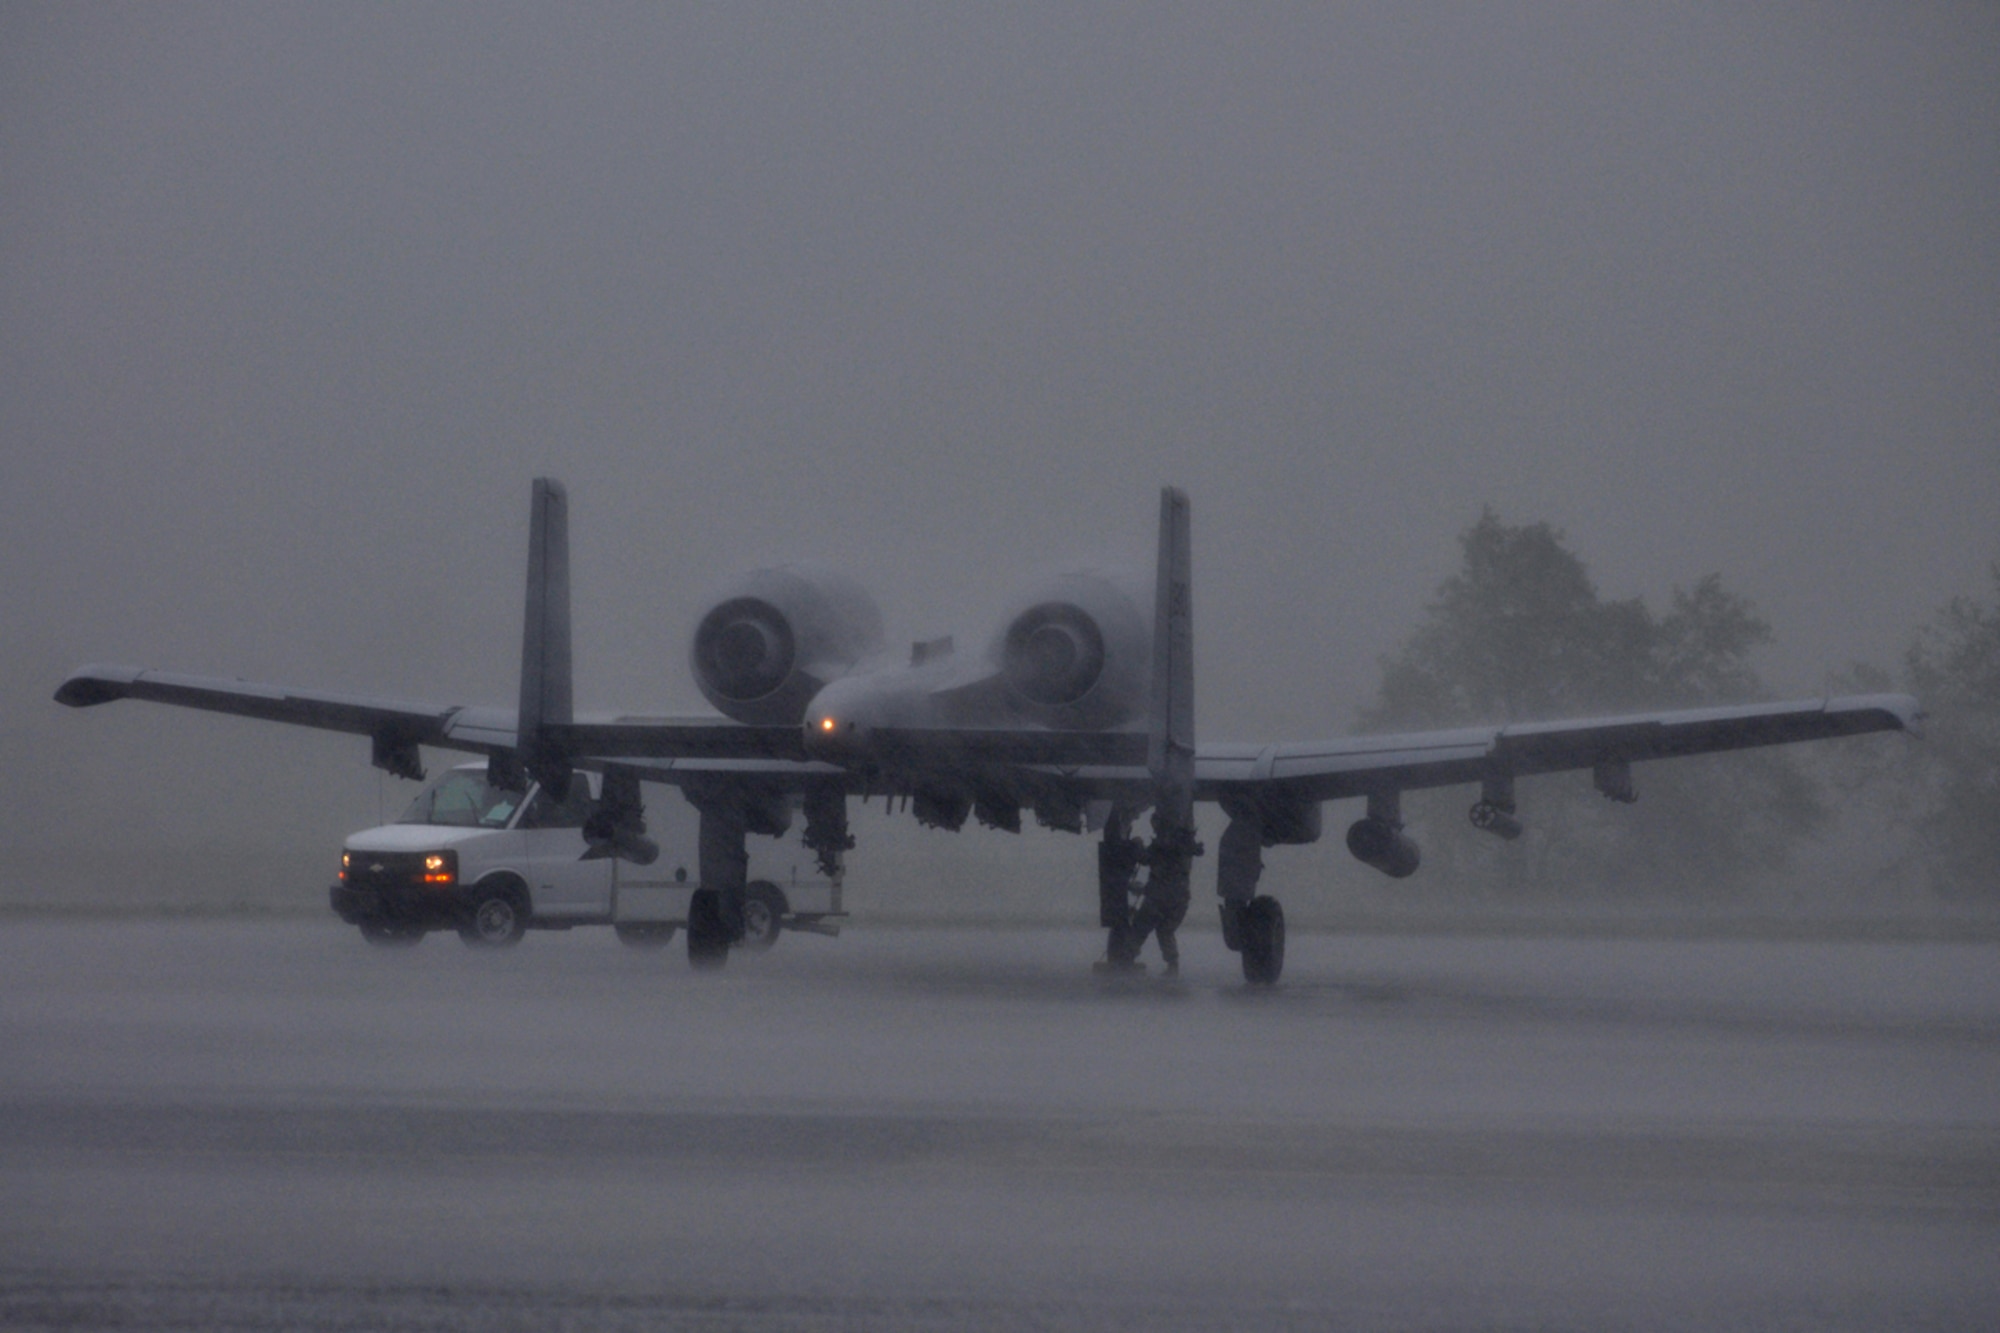 An Airman from the 917th Wing at Barksdale Air Force Base, La., chocks an A-10 Thunderbolt in a torrential downpour at Savannah Combat Readiness Training Center in Savannah, Ga., April 2, 2009. For his own safety and the protection of the aircraft’s cockpit, the pilot was forced to stay in the jet until the storm passed. (US Air Force photo/Tech. Sgt. Jeff Walston)